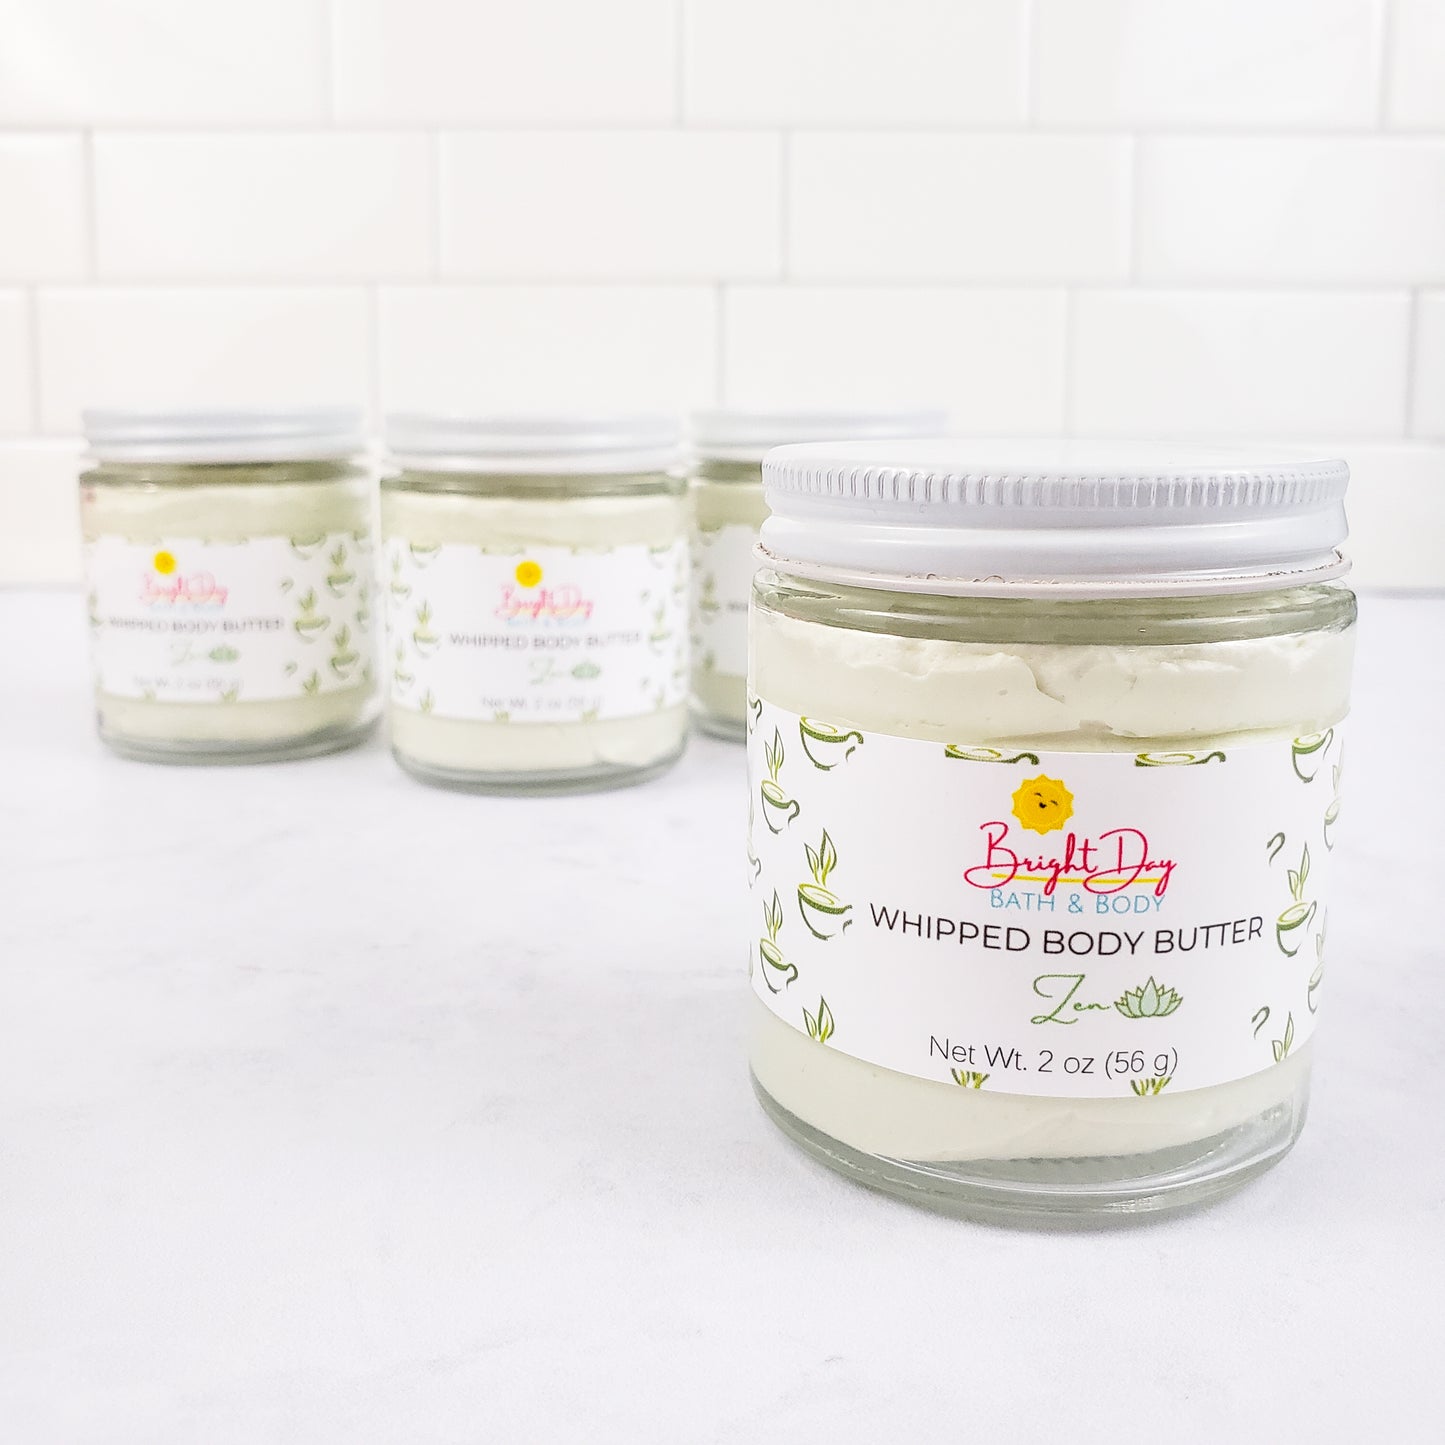 Three Zen Body Butter Jars on a tile background